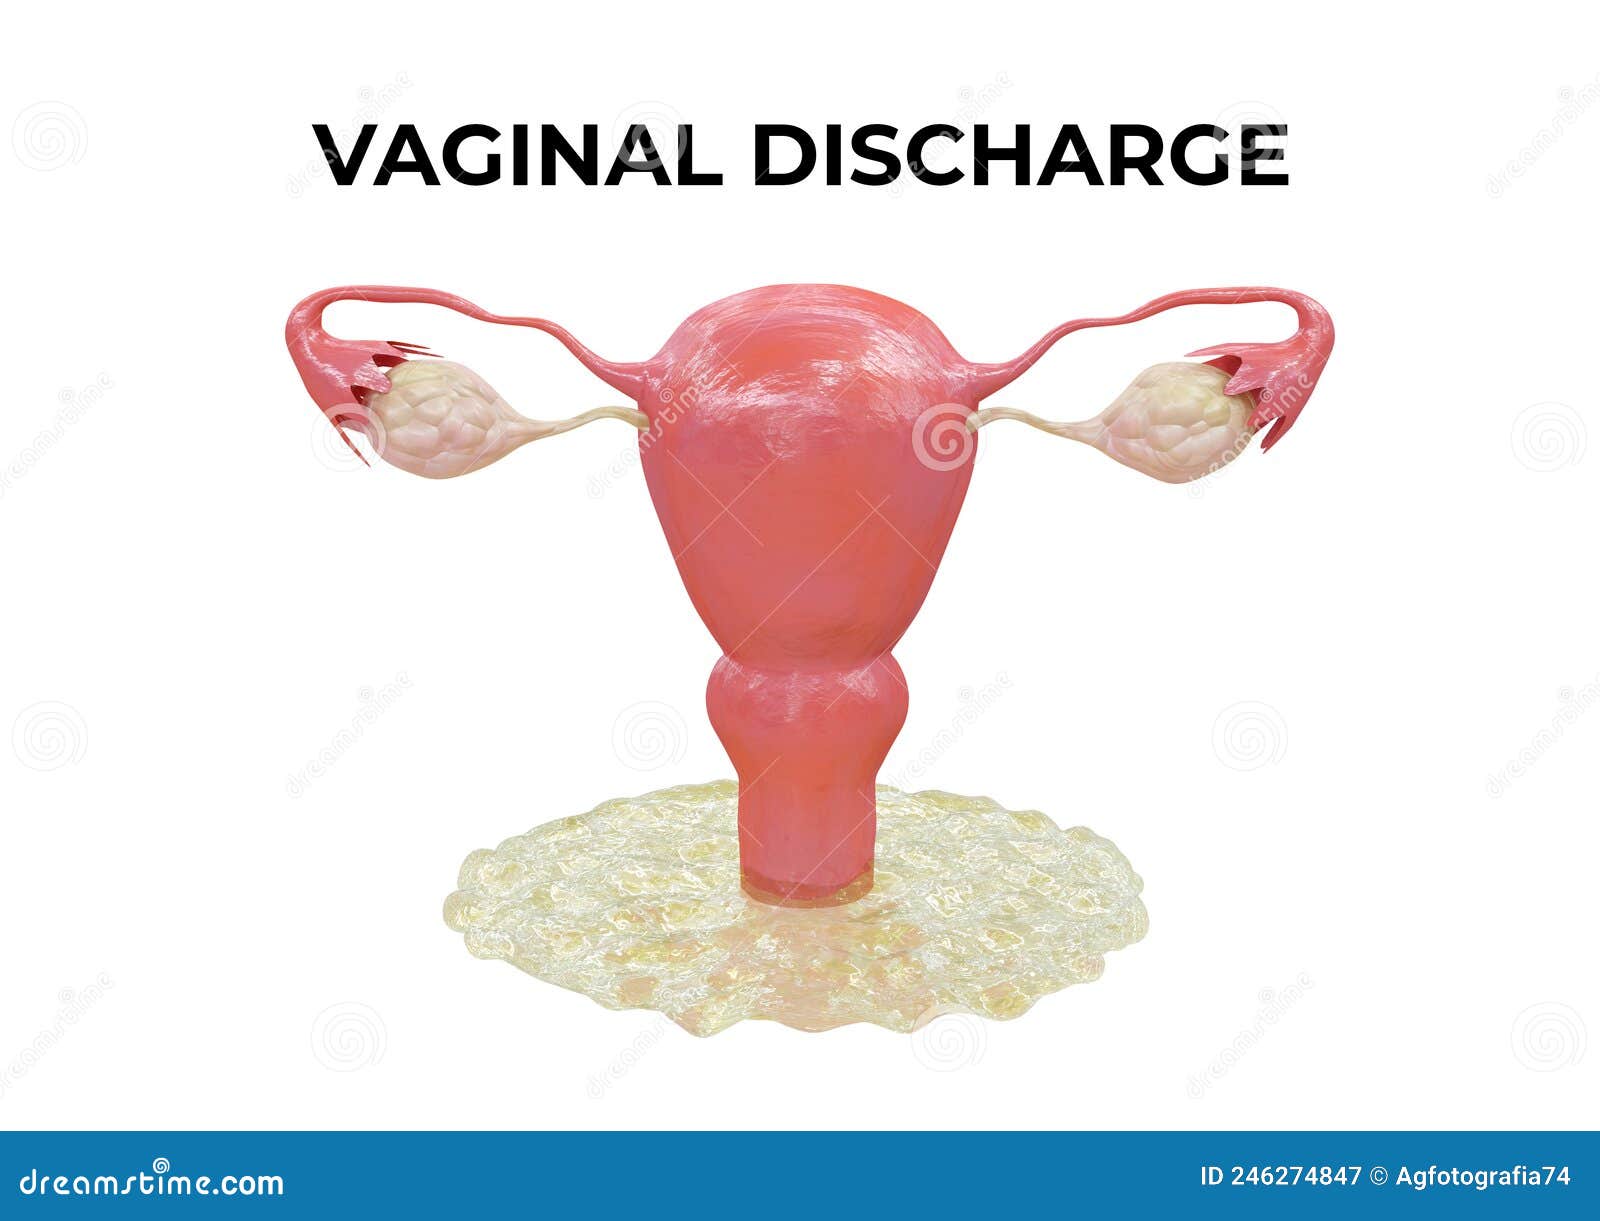 Vaginal Discharge is Excess Fluid and Cells from the Vagina that Ranges  from Whitish and Sticky To Clear and Watery in Color Stock Illustration -  Illustration of enlarged, infection: 246274847